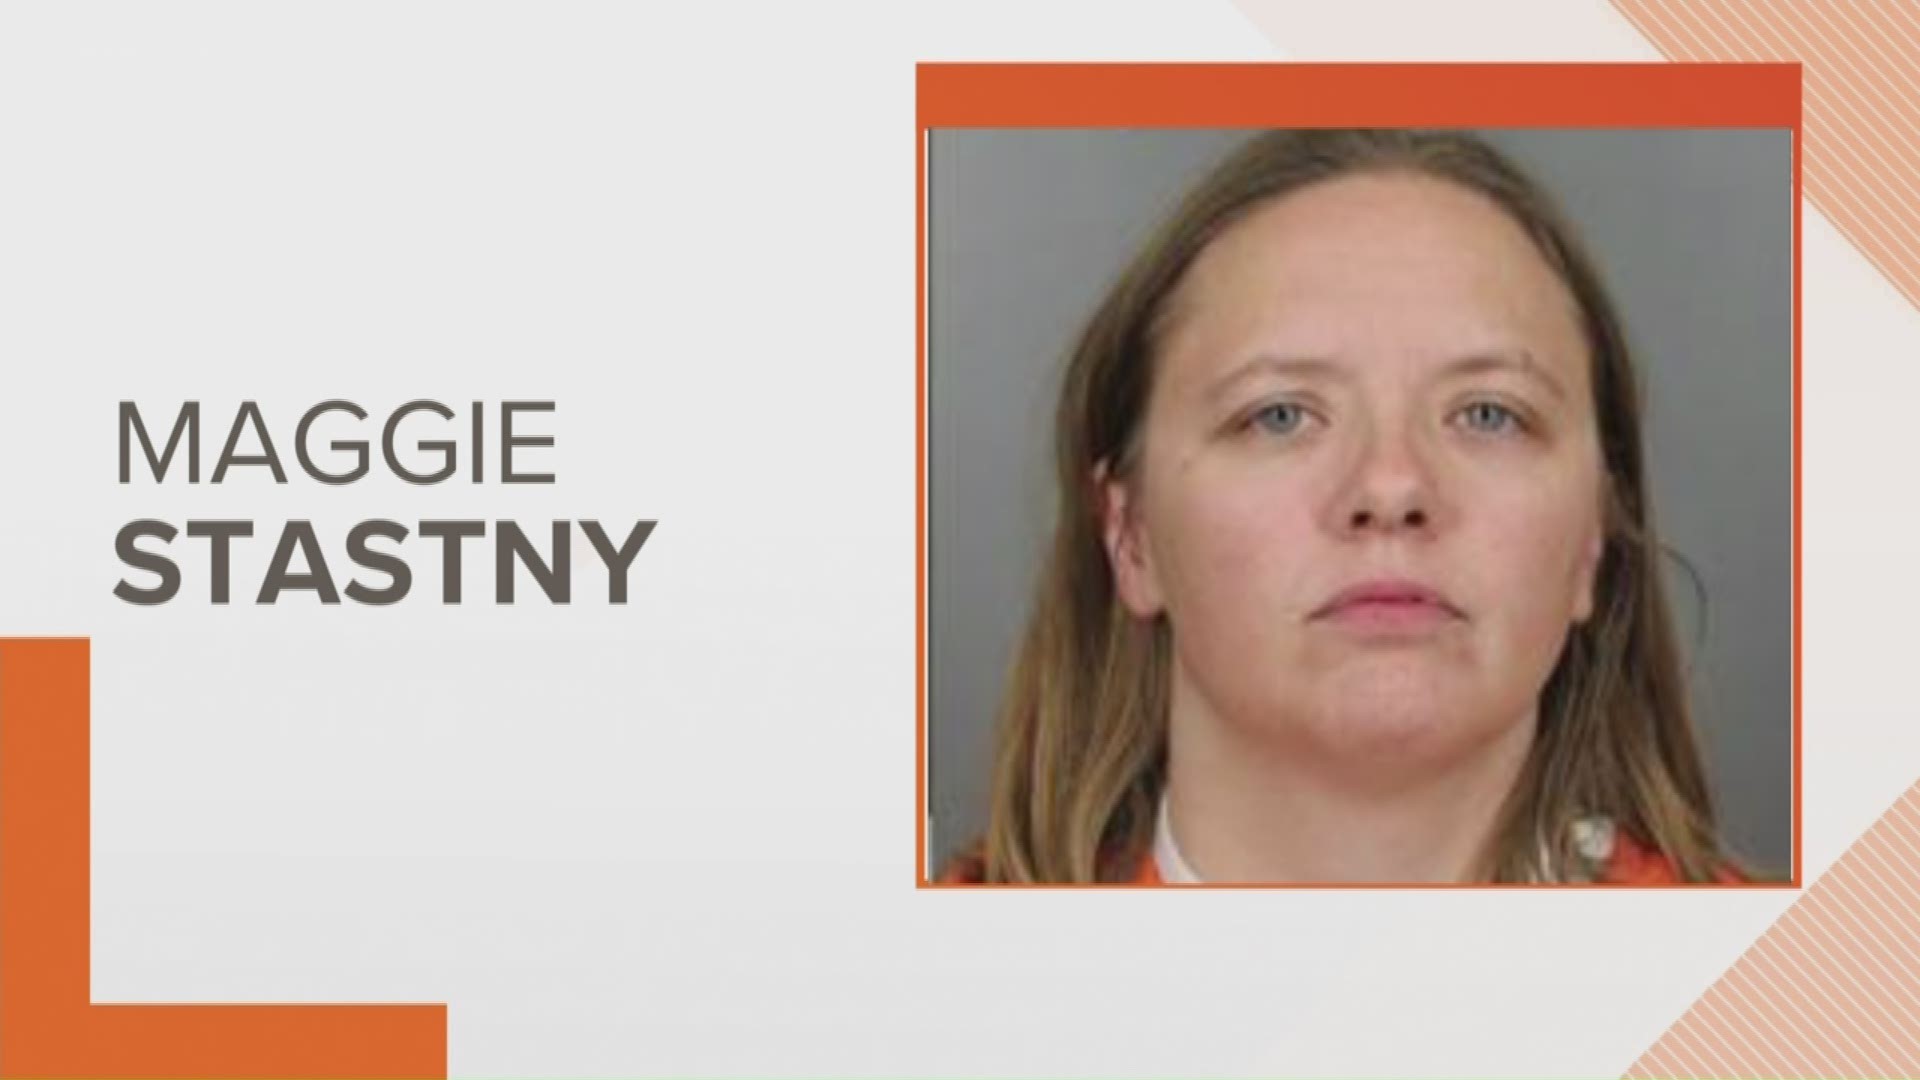 Maggie Stastny is accused of engaging in a sexual relationship with an underage inmate at a detention center earlier this year.